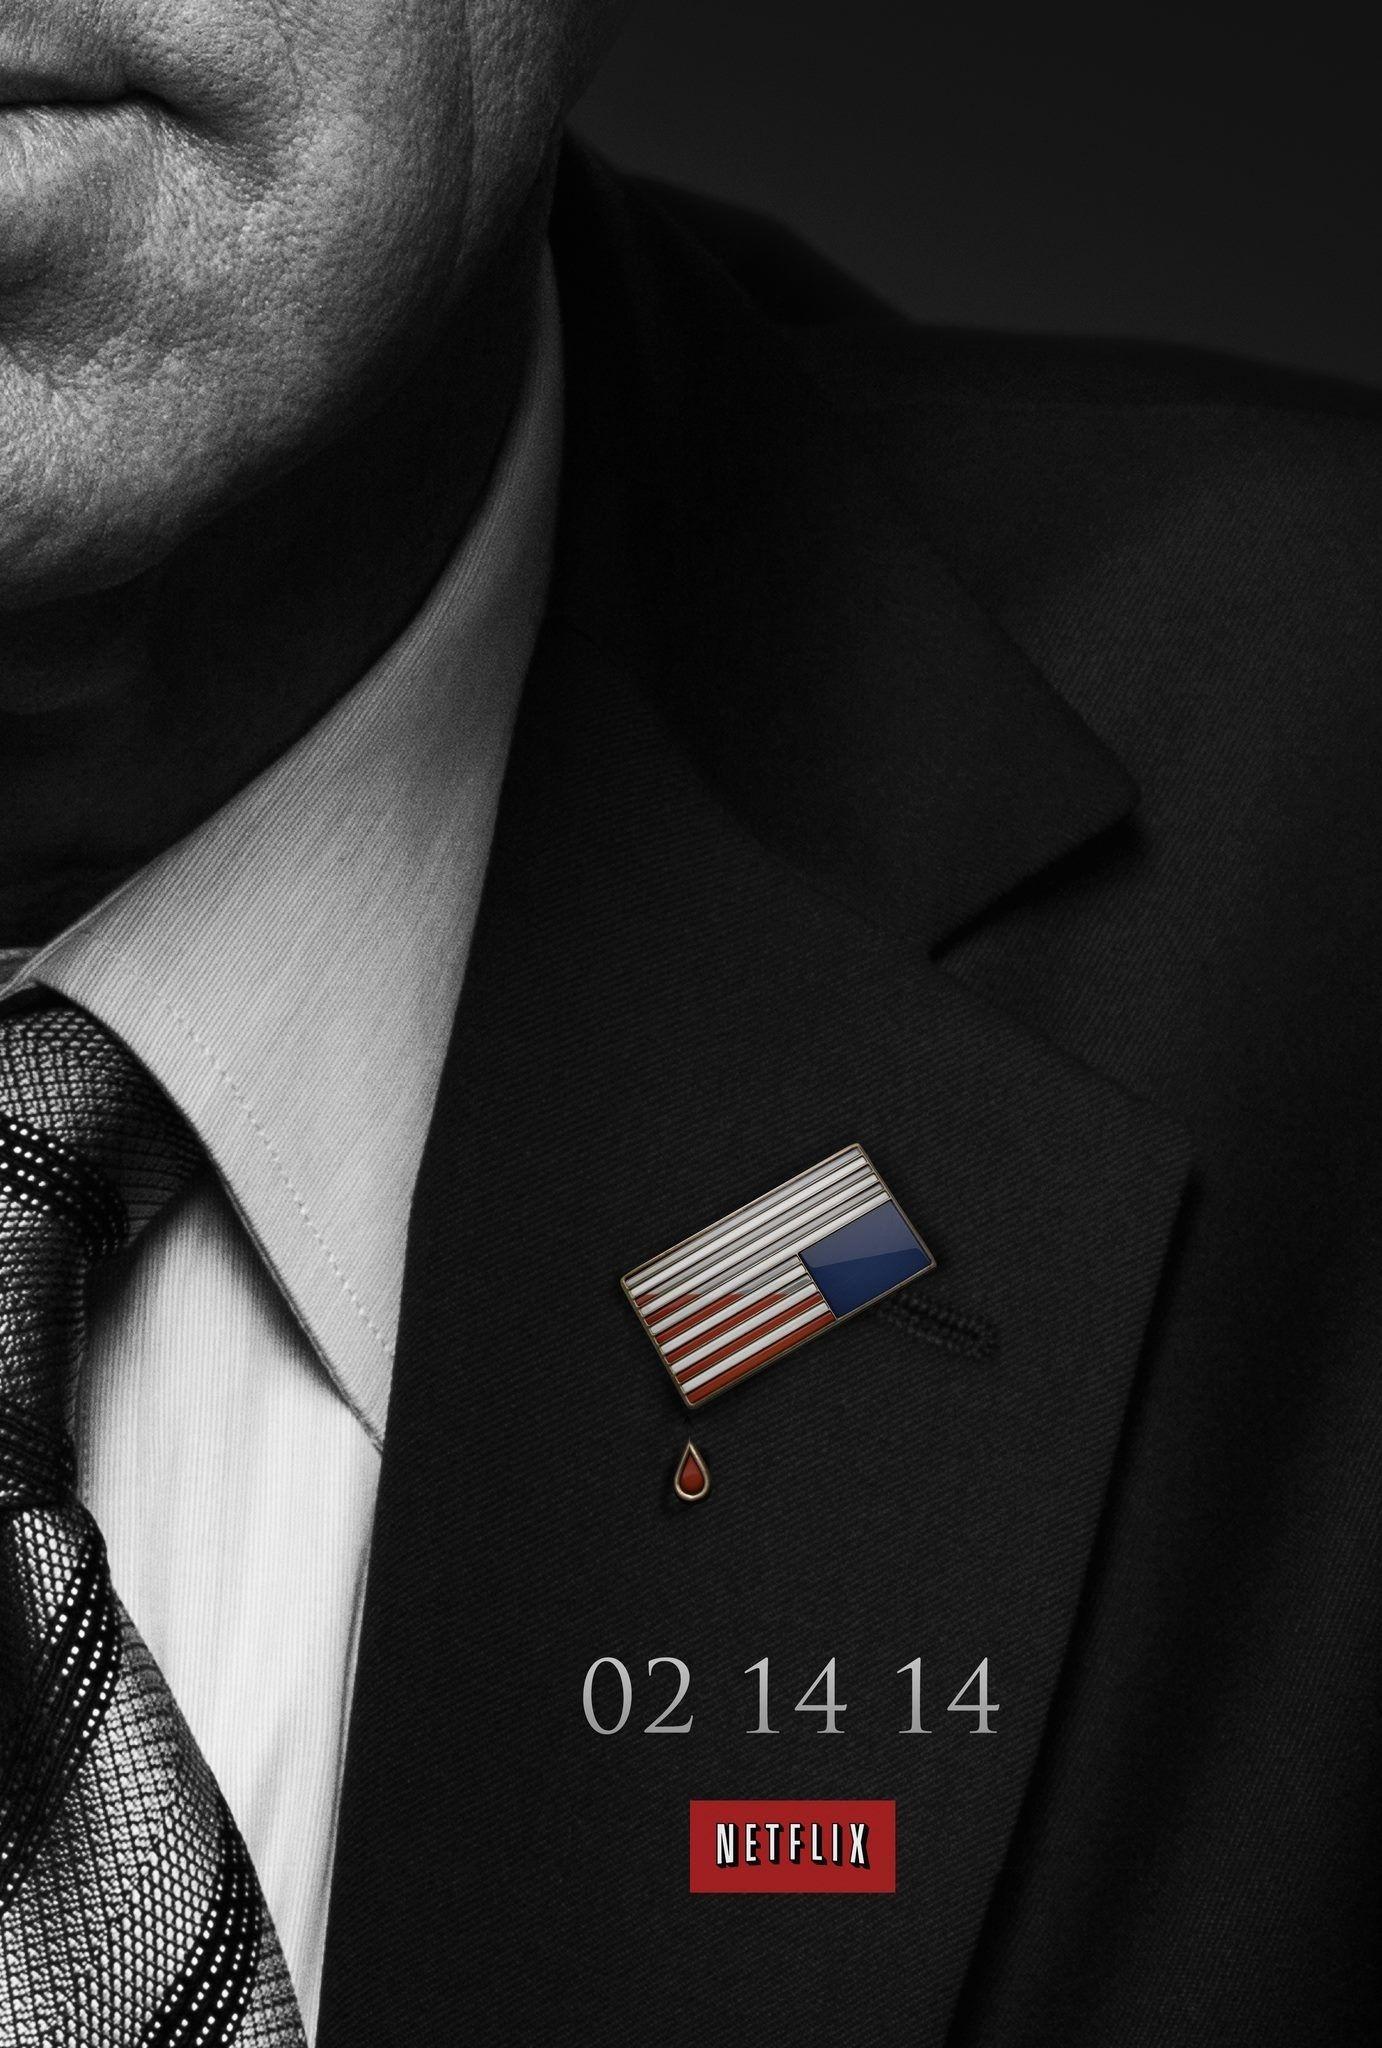 House Of Cards Wallpaper for iPhone iPhone 7 plus, iPhone 6 plus